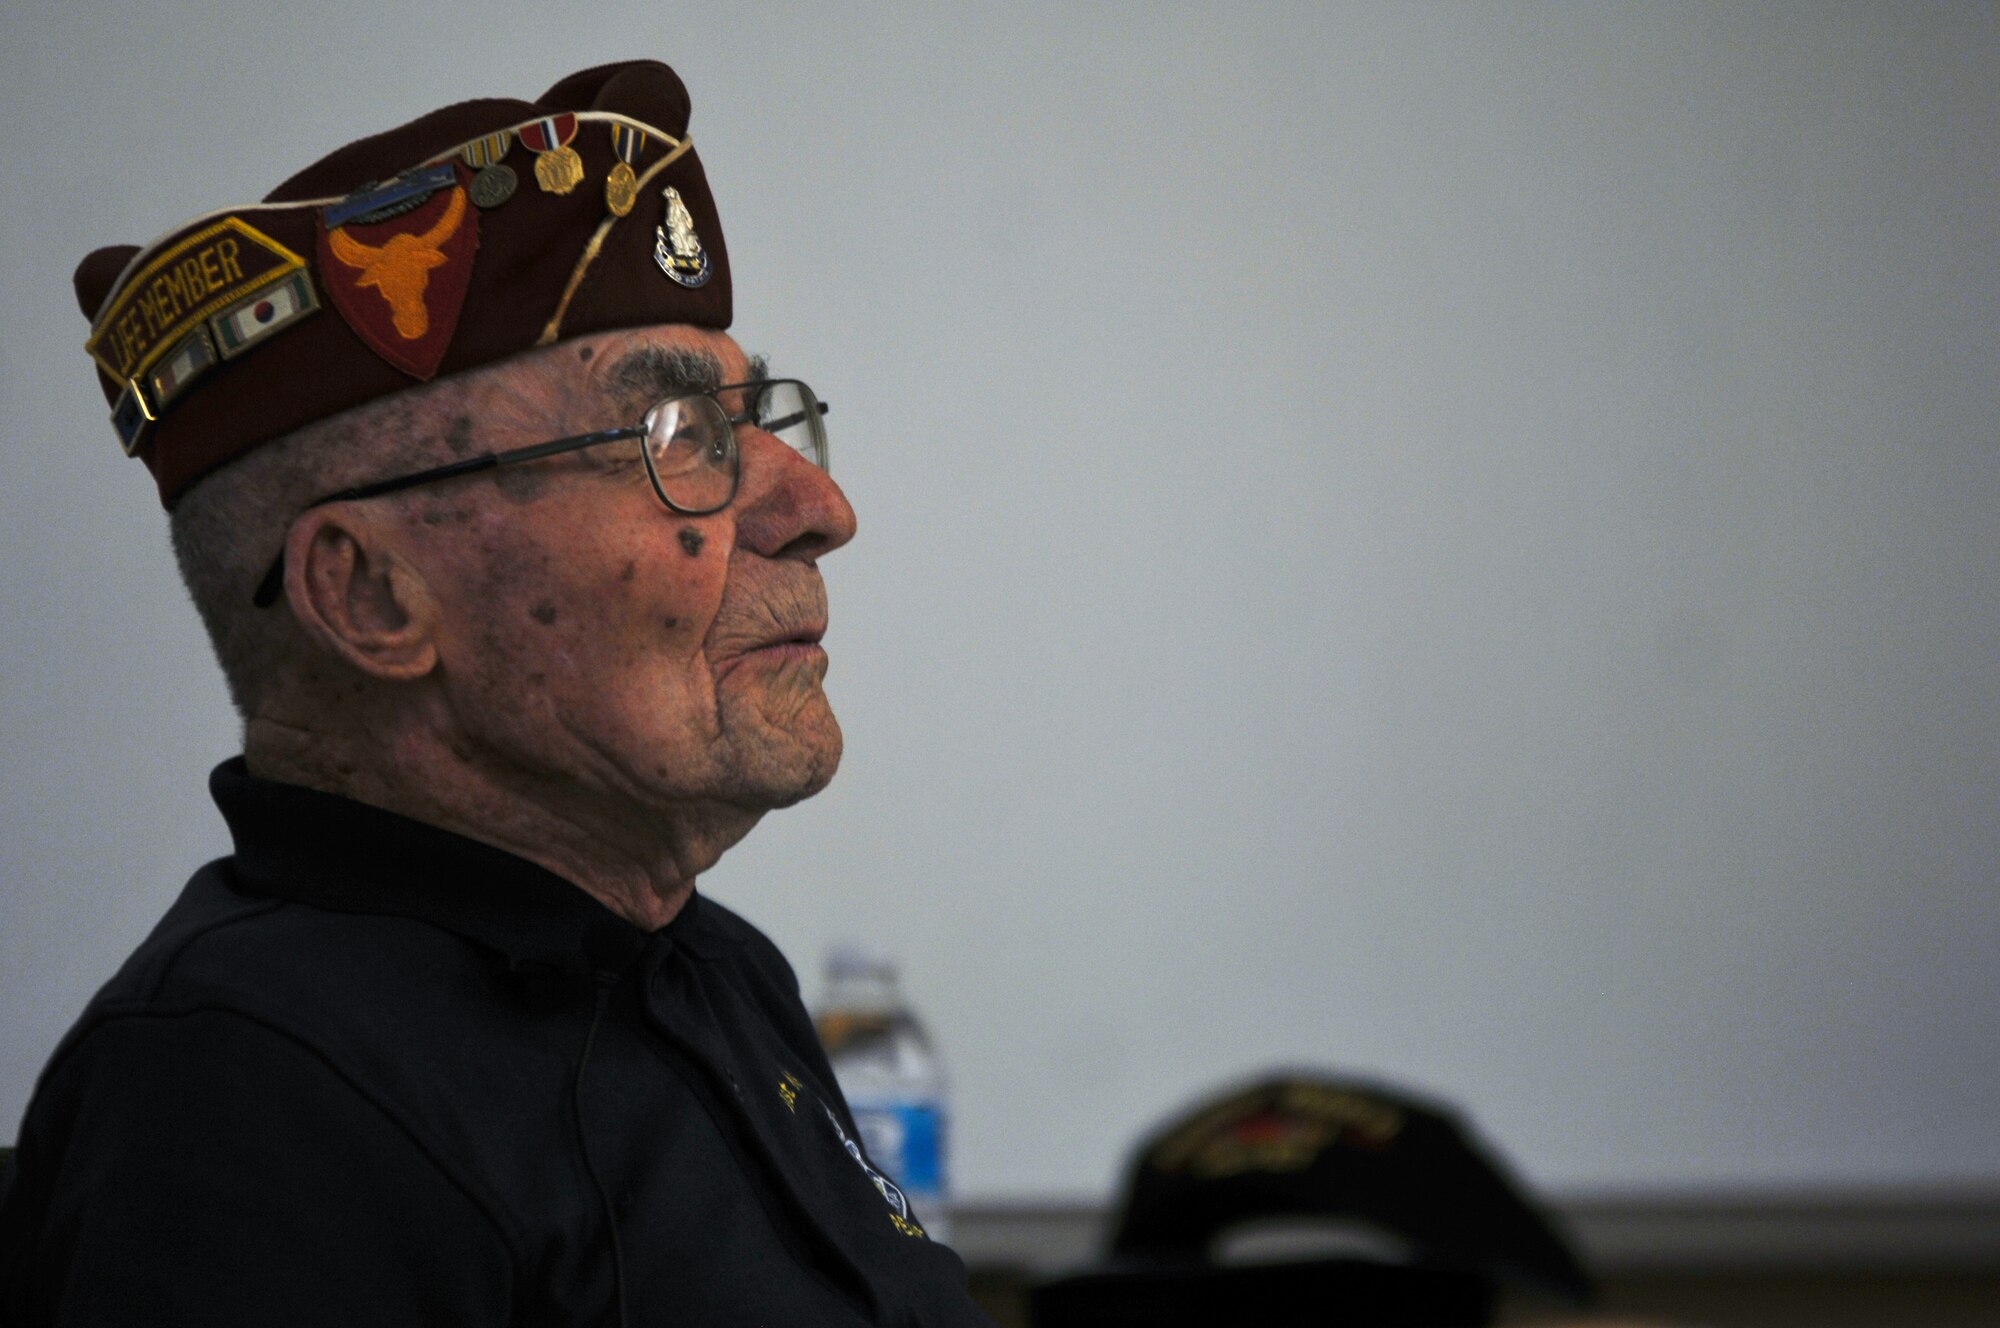 Paul Kerchum, a retired chief master sergeant with the Air Force and the Army Air Corps, recalls a moment while describing his experiences in World War II and his survival of the Bataan Death March at White Sands Missile Range, N.M., March 24, 2018. Kerchum addressed a crowd who gathered to hear his and six other survivors’ experiences with the Bataan Death March, and to support the 2018 Bataan Memorial Death March, a 26.2-mile race which honors those who defended the Philippines during World War II. (U.S. Army photo by Pvt. Matthew J. Marcellus)